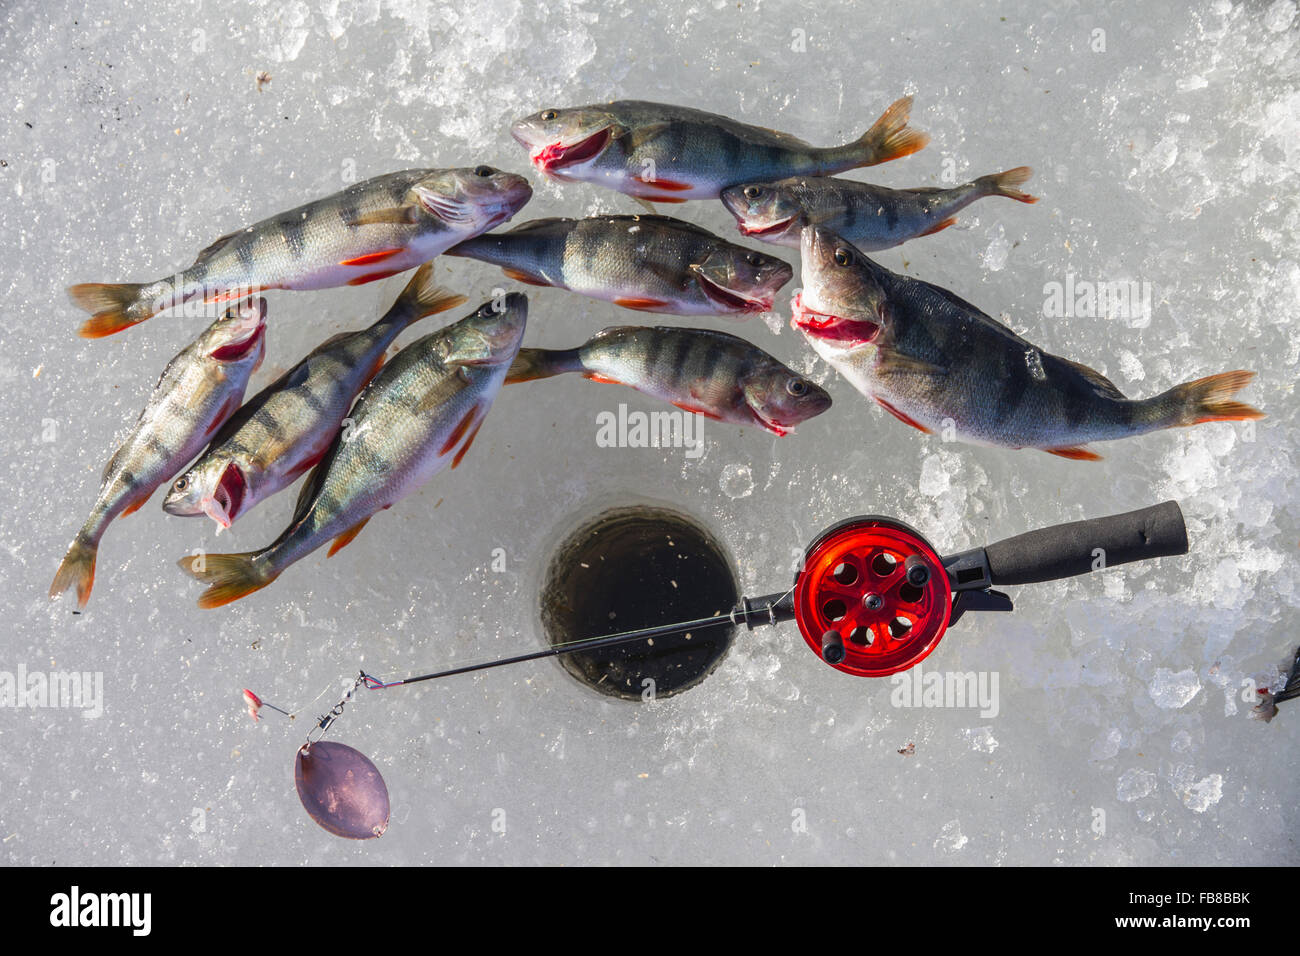 Sweden, View of dead fish next to fishing hole Stock Photo